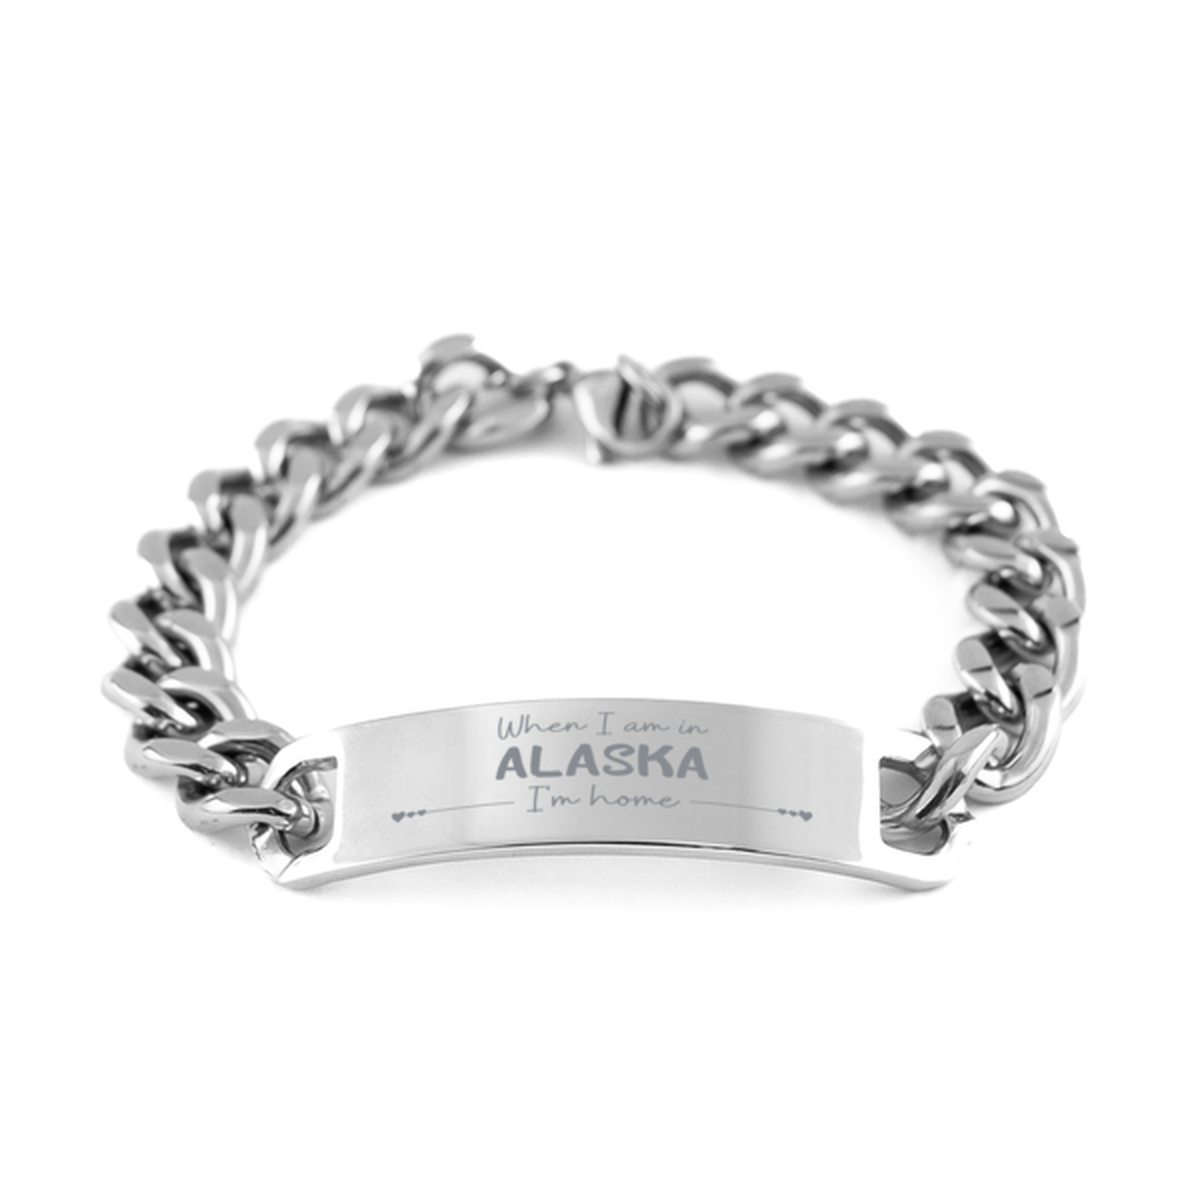 When I am in Alaska I'm home Cuban Chain Stainless Steel Bracelet, Cheap Gifts For Alaska, State Alaska Birthday Gifts for Friends Coworker